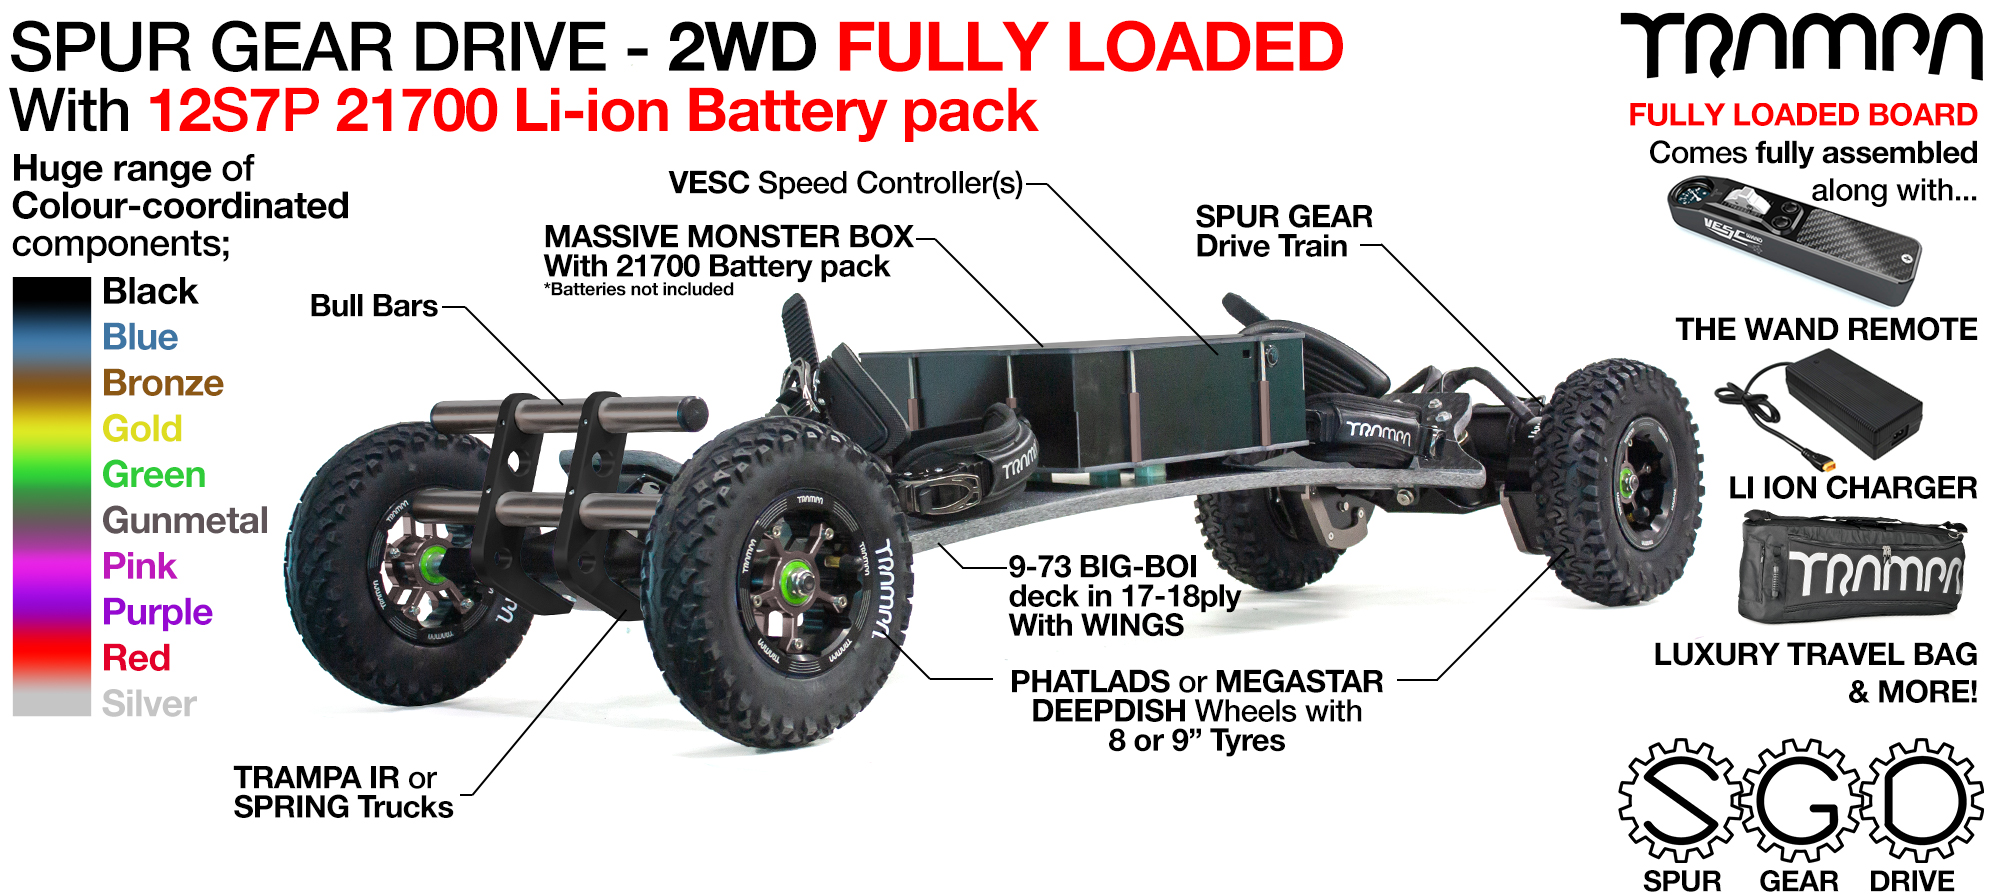 2WD SPUR GEAR DRIVE Electric Mountainboard - FULLY LOADED BigBoi Deck with 21700 Cell Pack, The WAND, a 12A Charger & Bull Bars all included, Shipped fully assembled in a Luxury Travel Bag as standard!! 